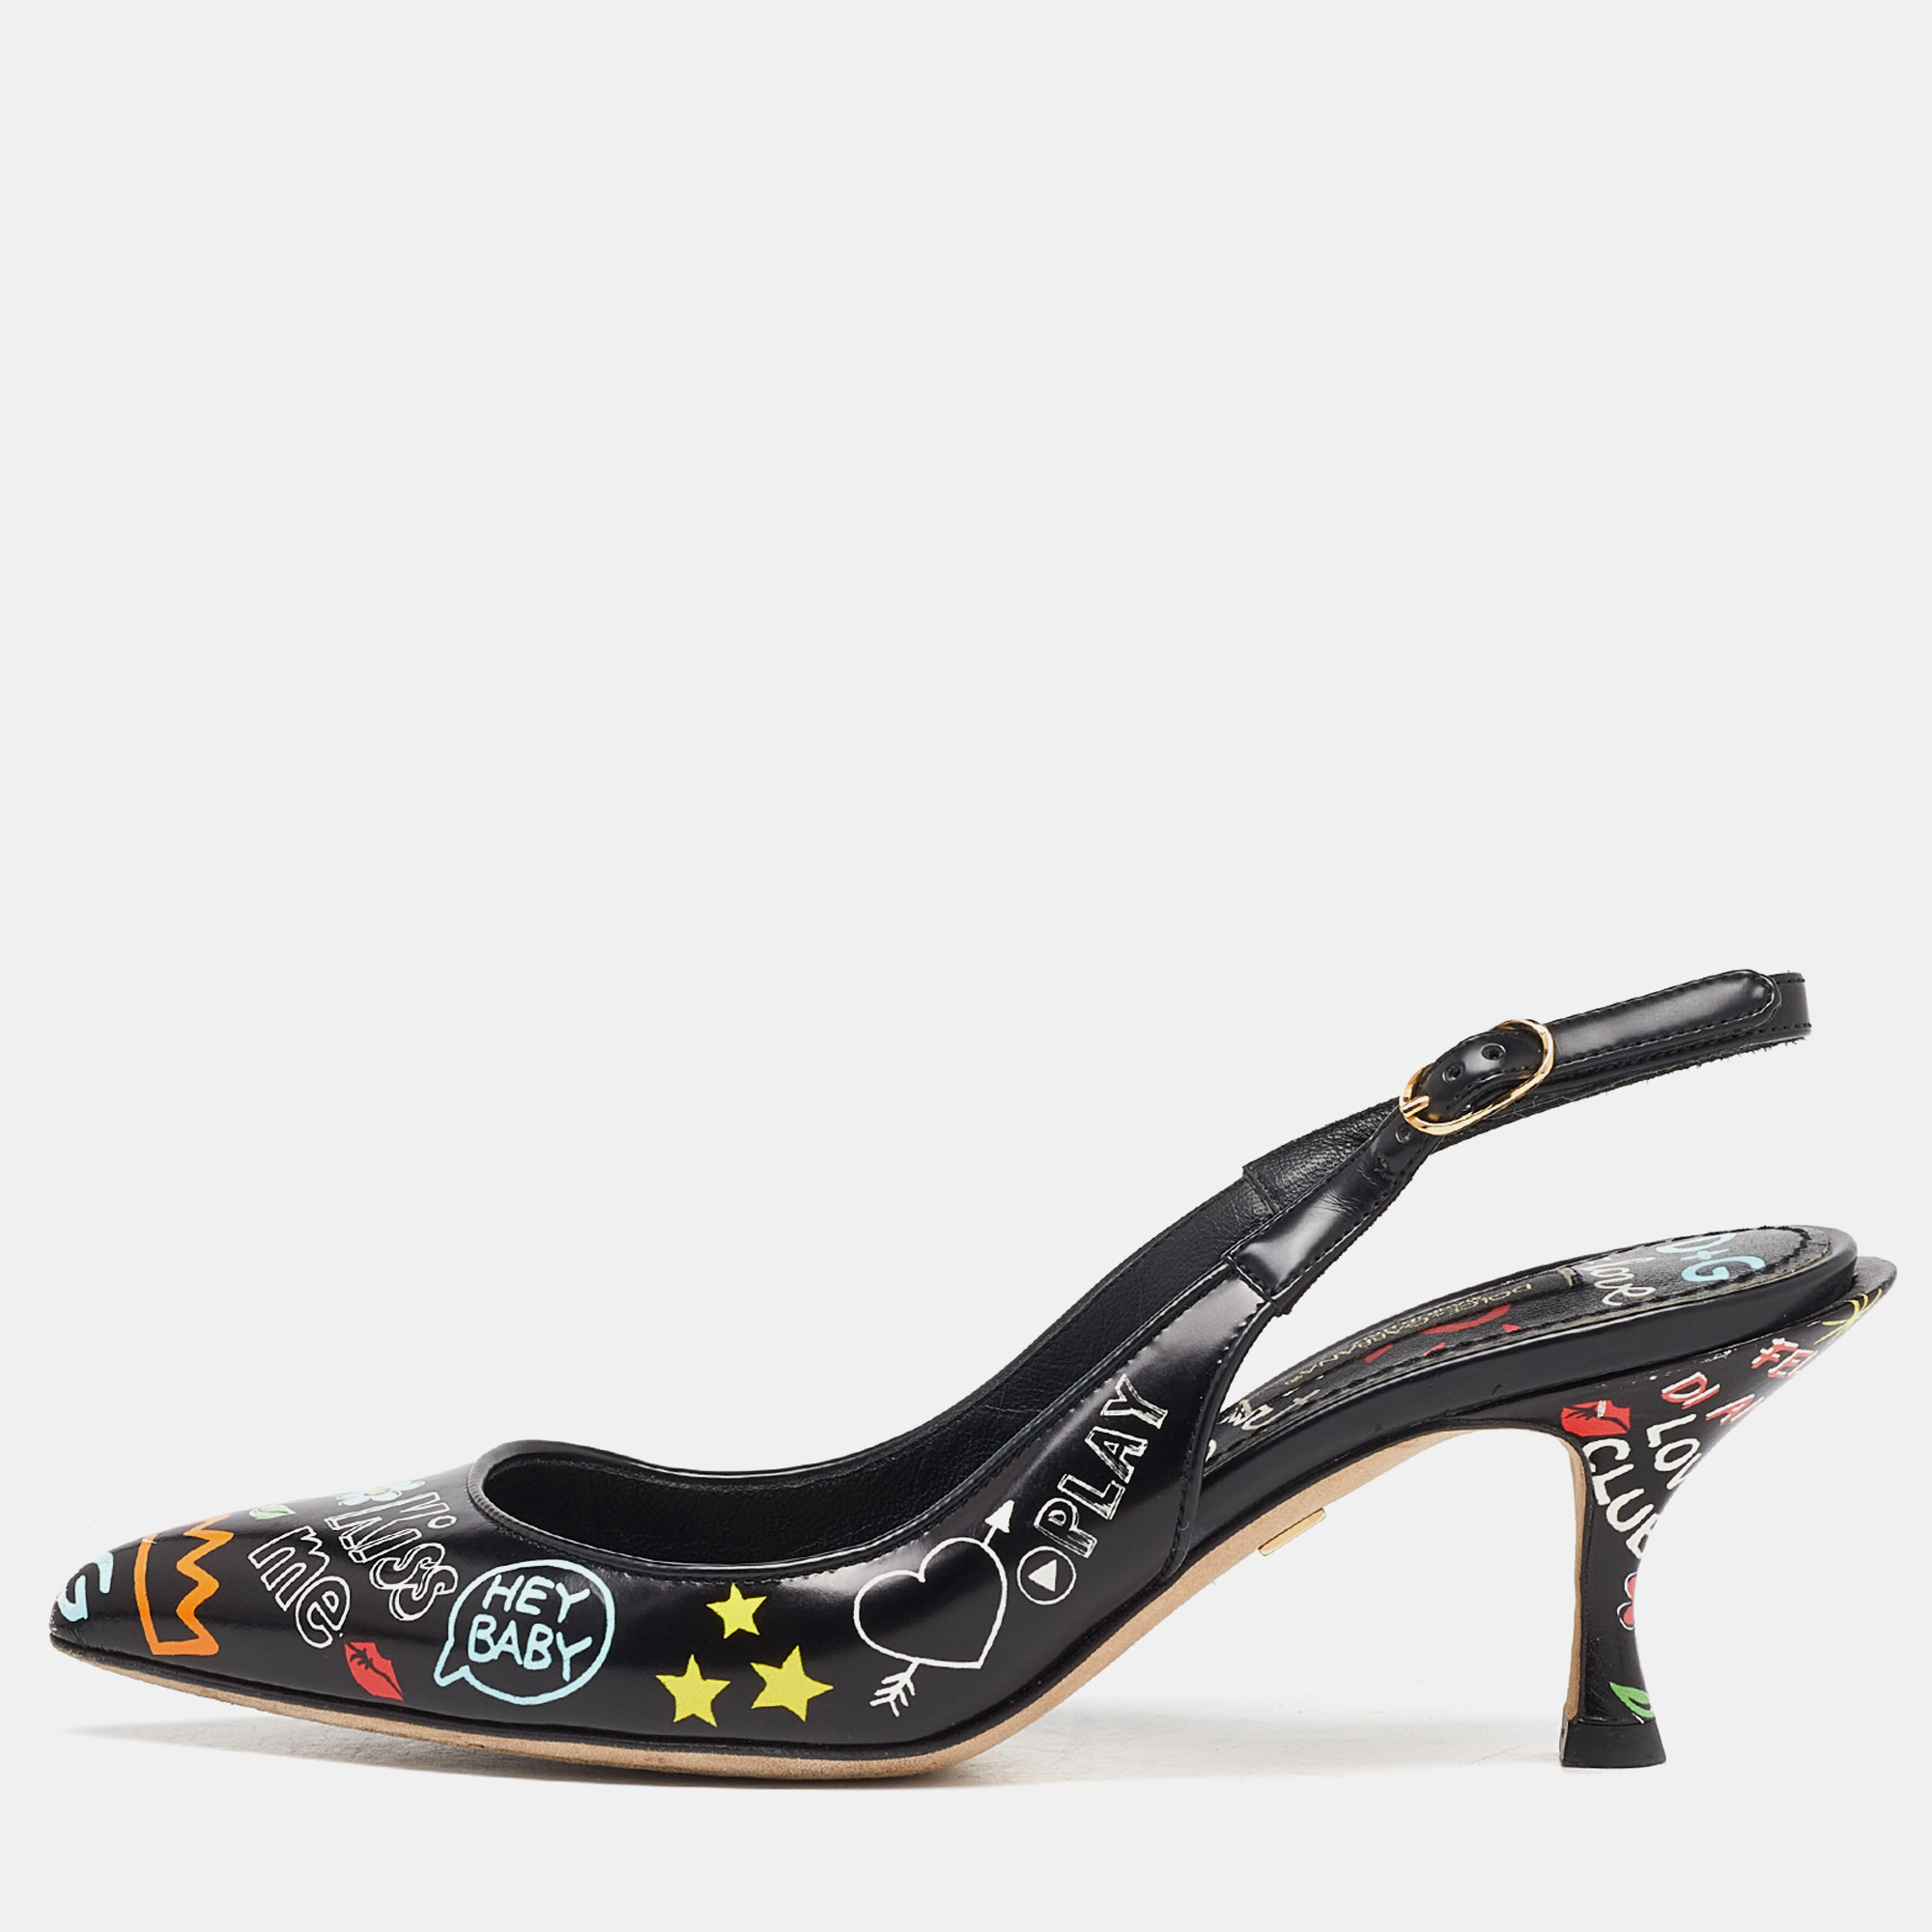 Dolce & gabbana multicolor printed leather slingback pointed toe pumps size 36